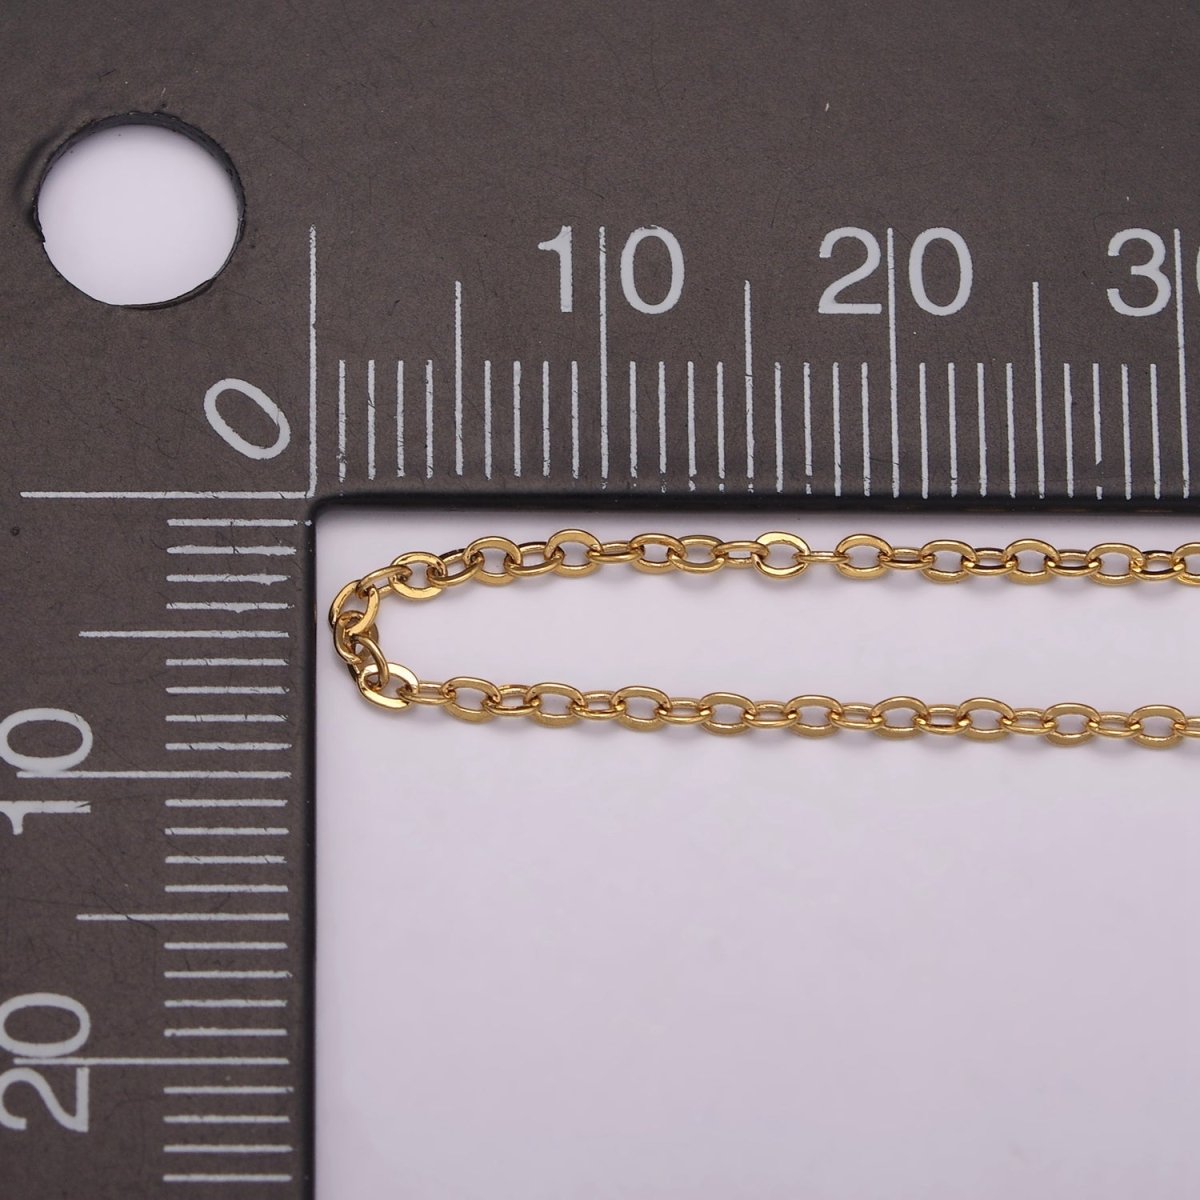 16K Gold Filled 1.5mm Dainty Minimalist Cable 18 Inch Layering Chain Necklace w. Extender in Gold & Silver | WA-438 WA-439 Clearance Pricing - DLUXCA